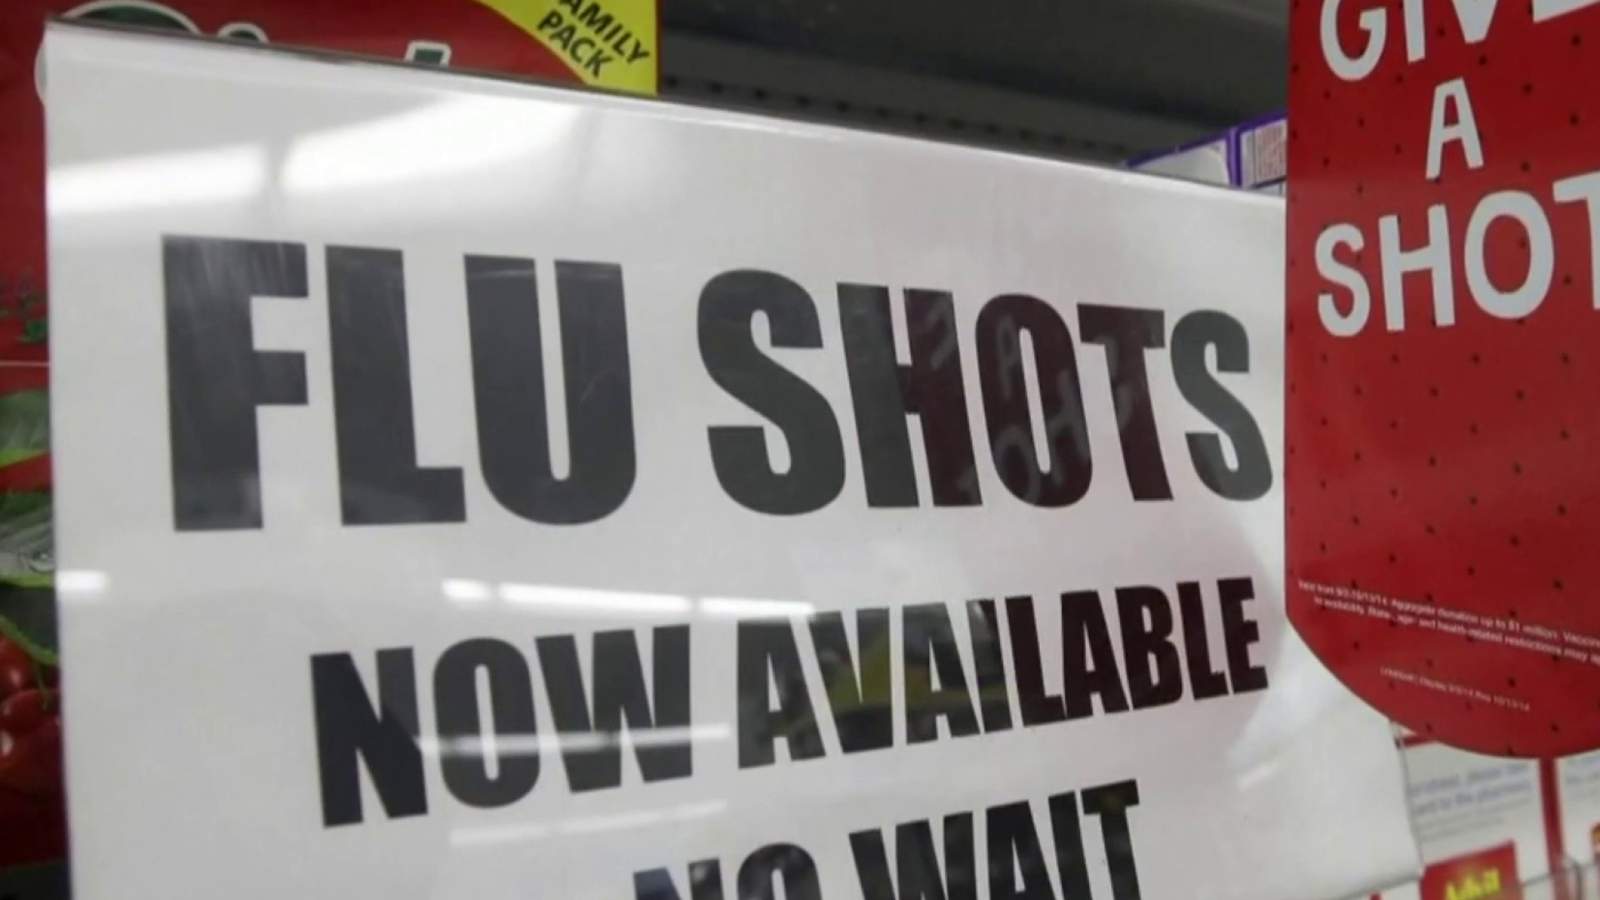 State Medical Executive urges Michiganders to get vaccinated against flu this Fall